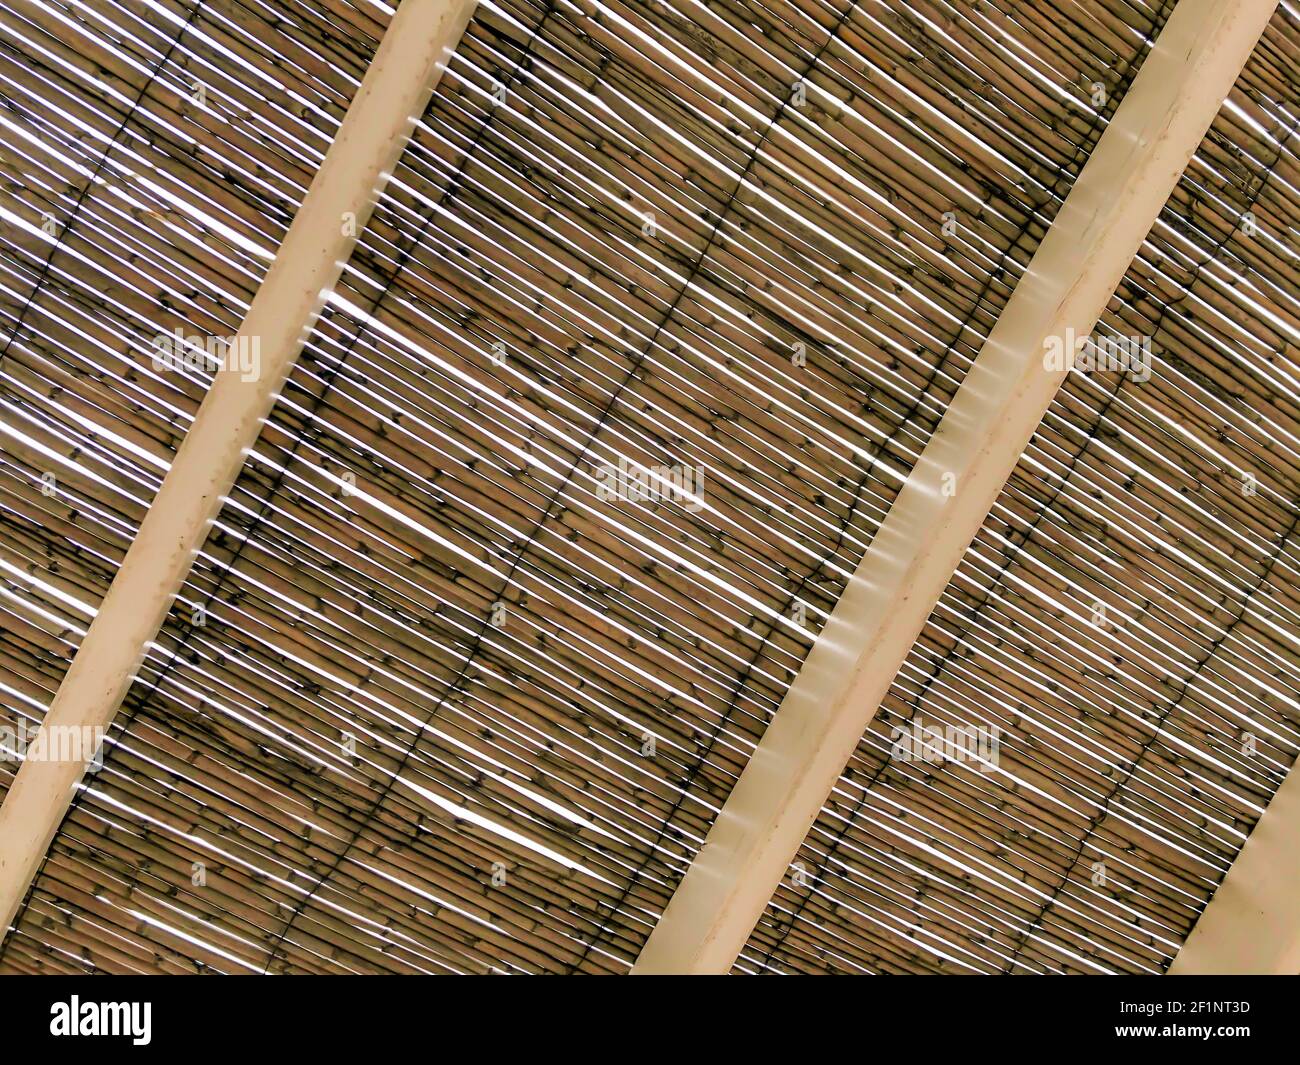 Natural material and texture concept: Straw roof as background. Dried bamboo branches. Rustic decoration with tropical touch. Wooden brown shelter Stock Photo